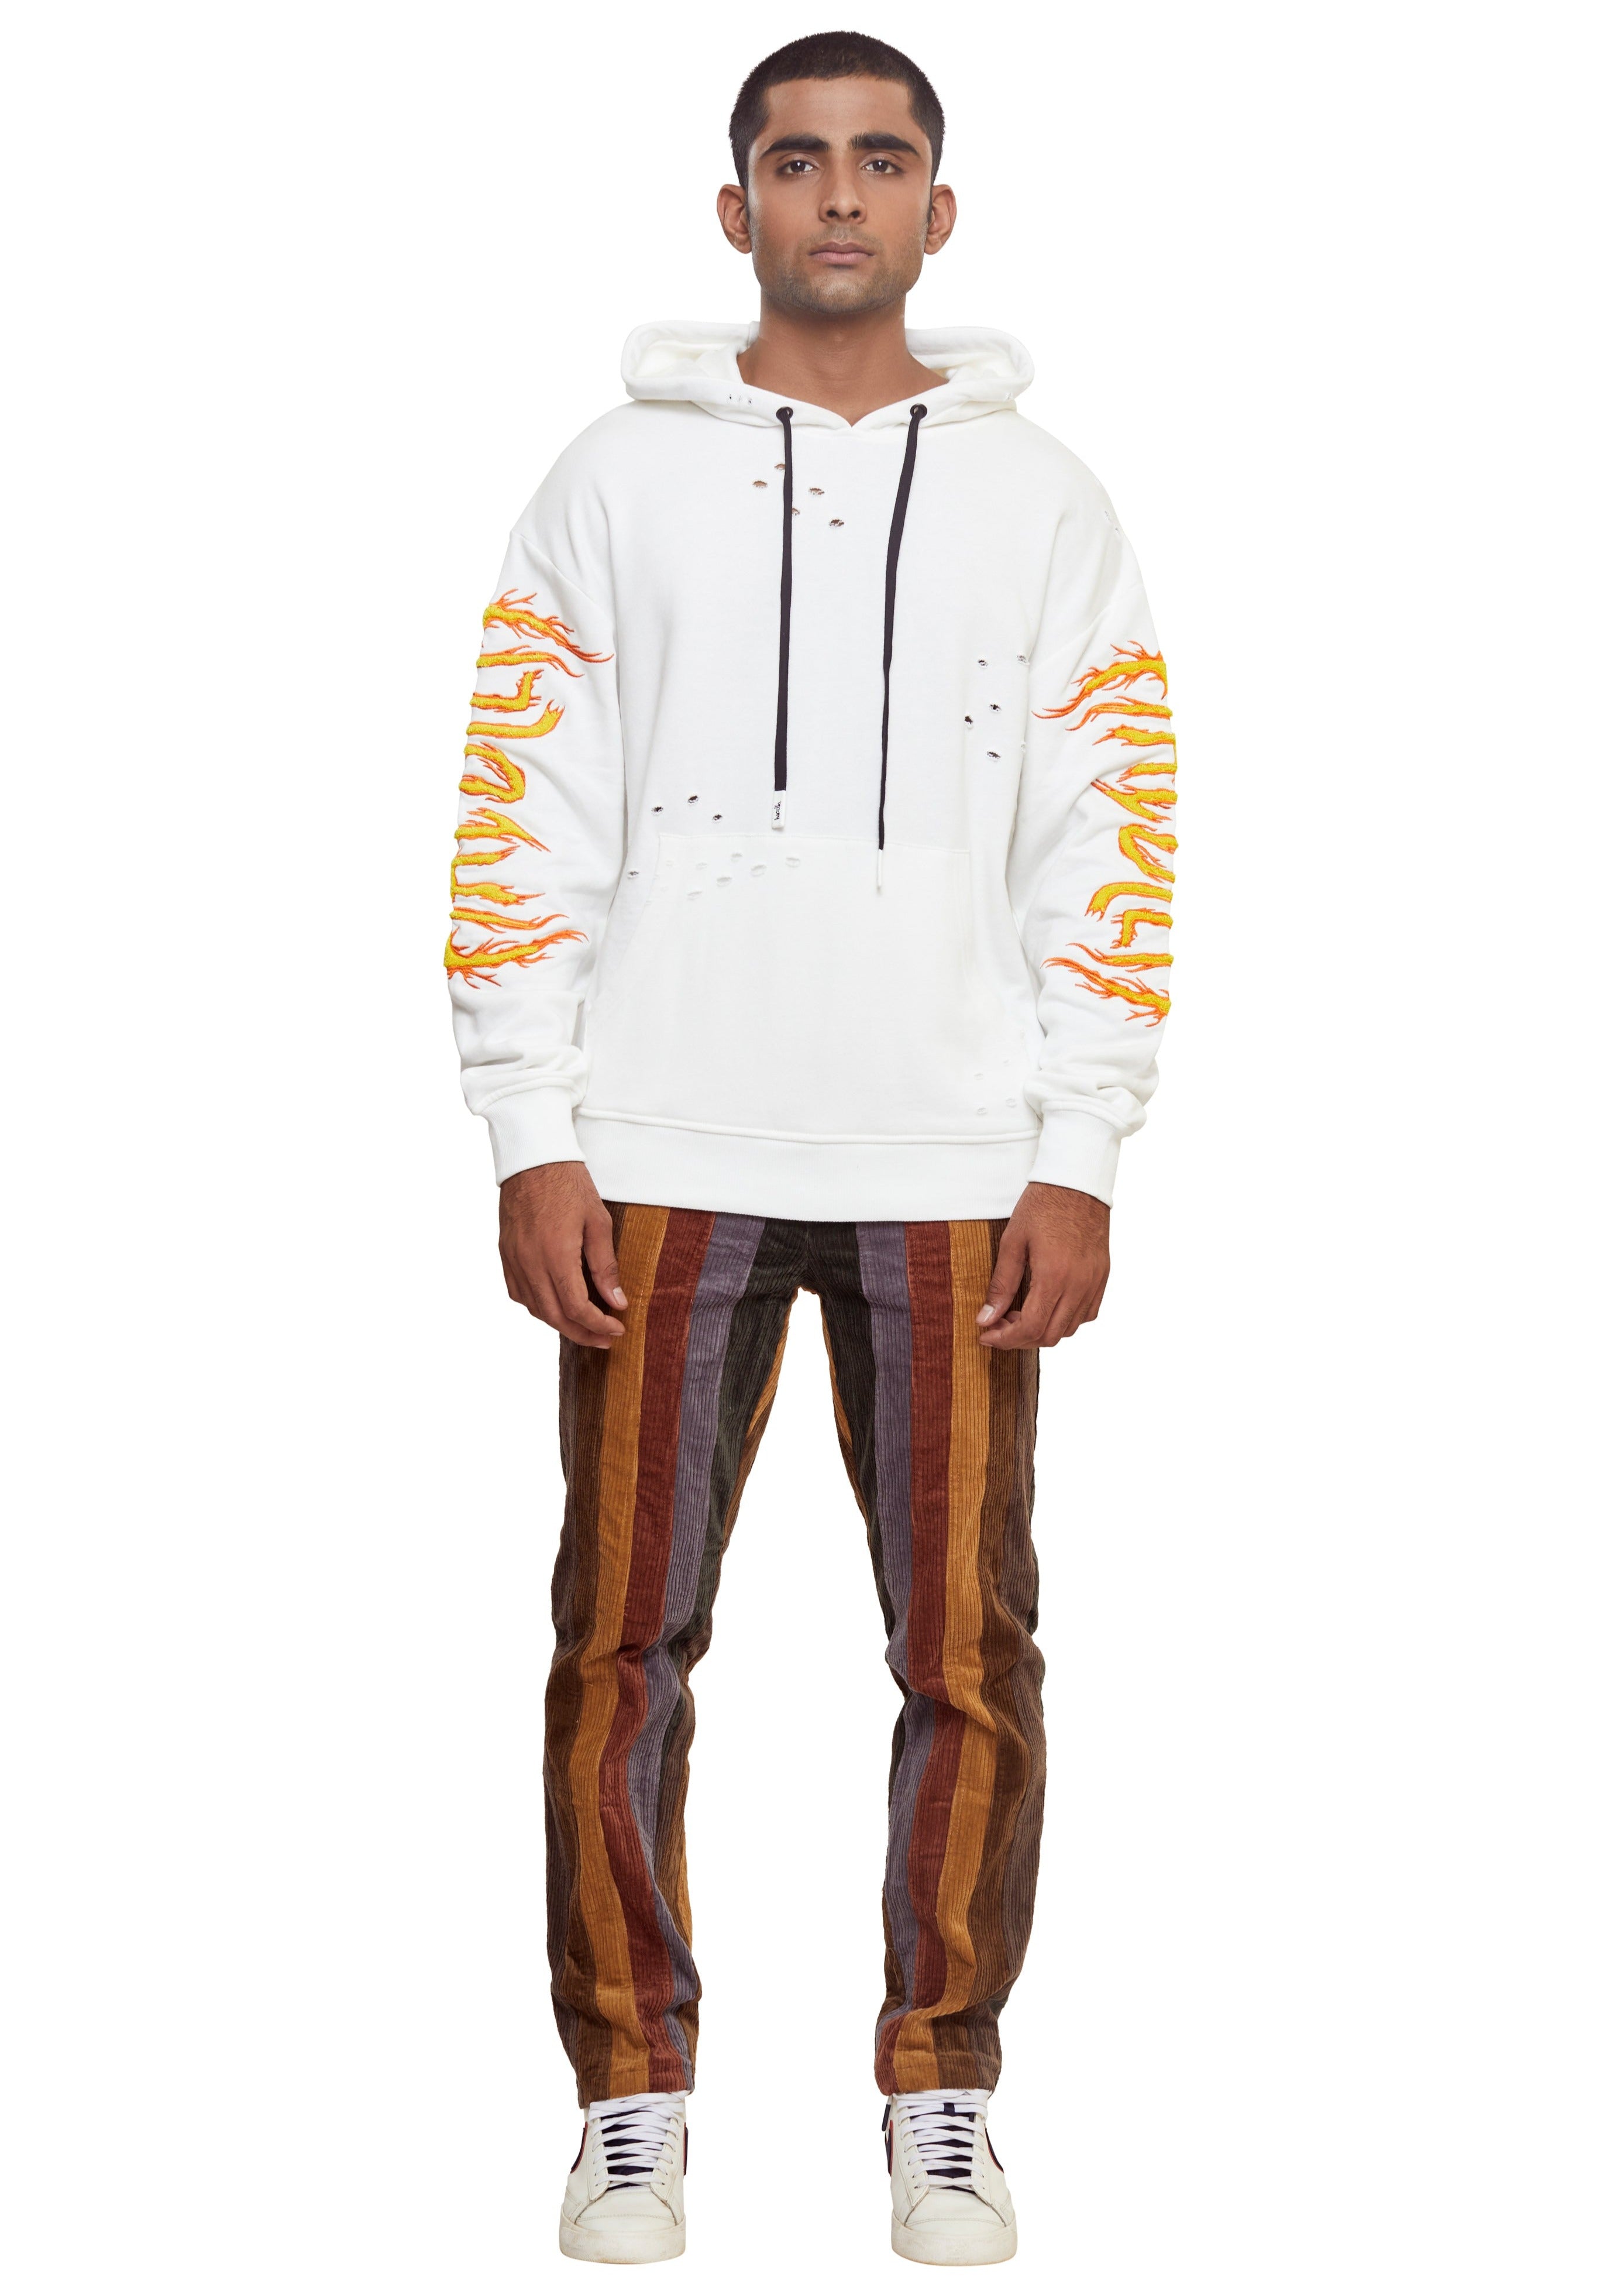 White Distressed cotton "Hac on Fire" embroidered over-sized drop shoulder pull-over hoodie from the brand Haculla